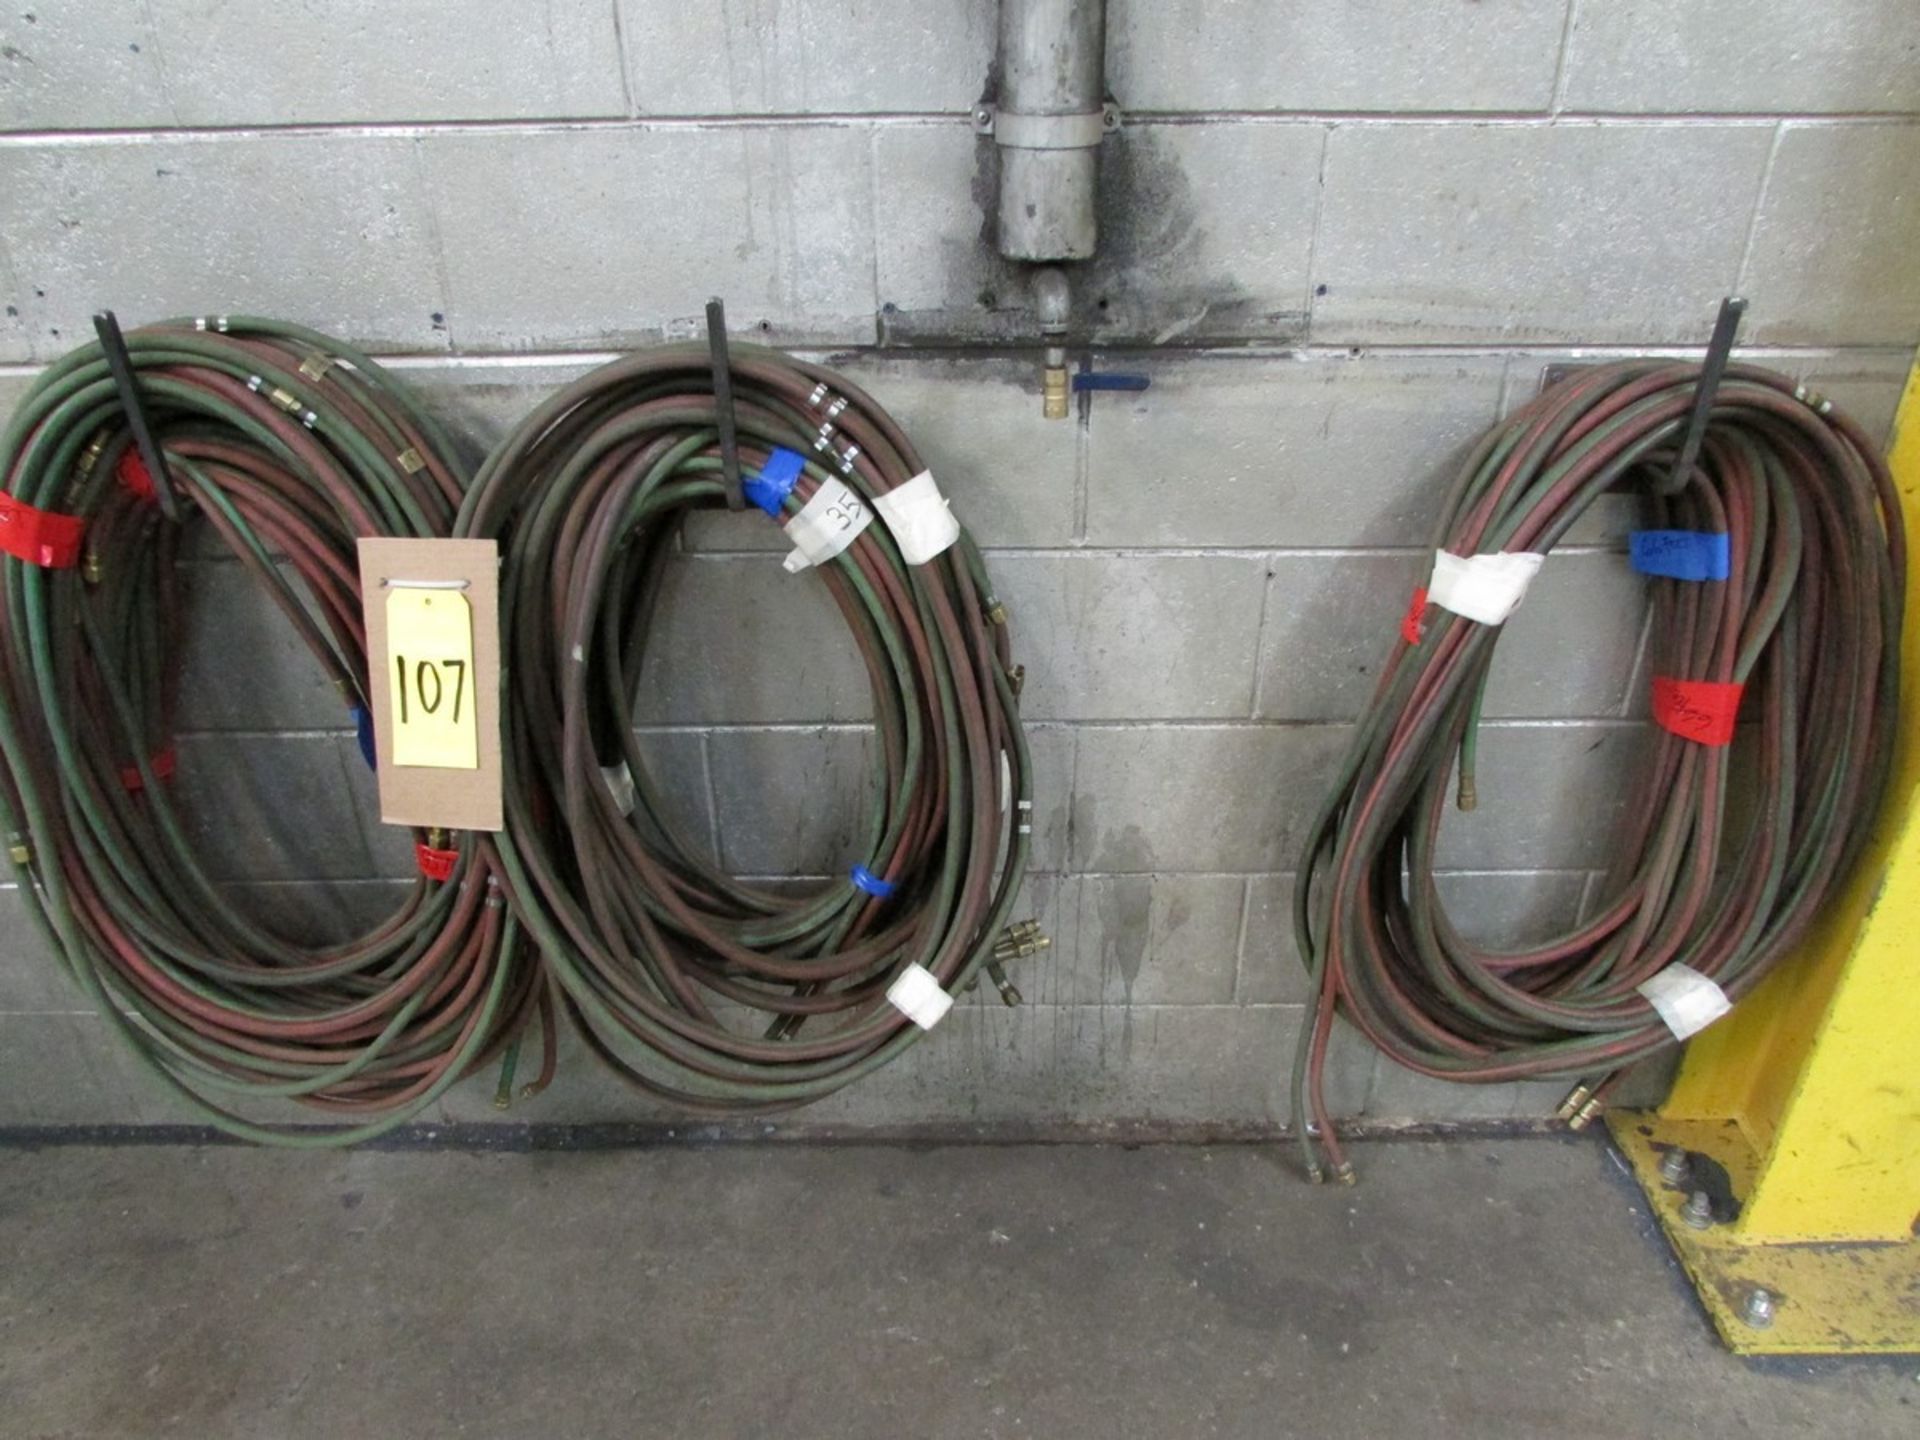 Approx. 300' of oxyacetylene hose in various sizes